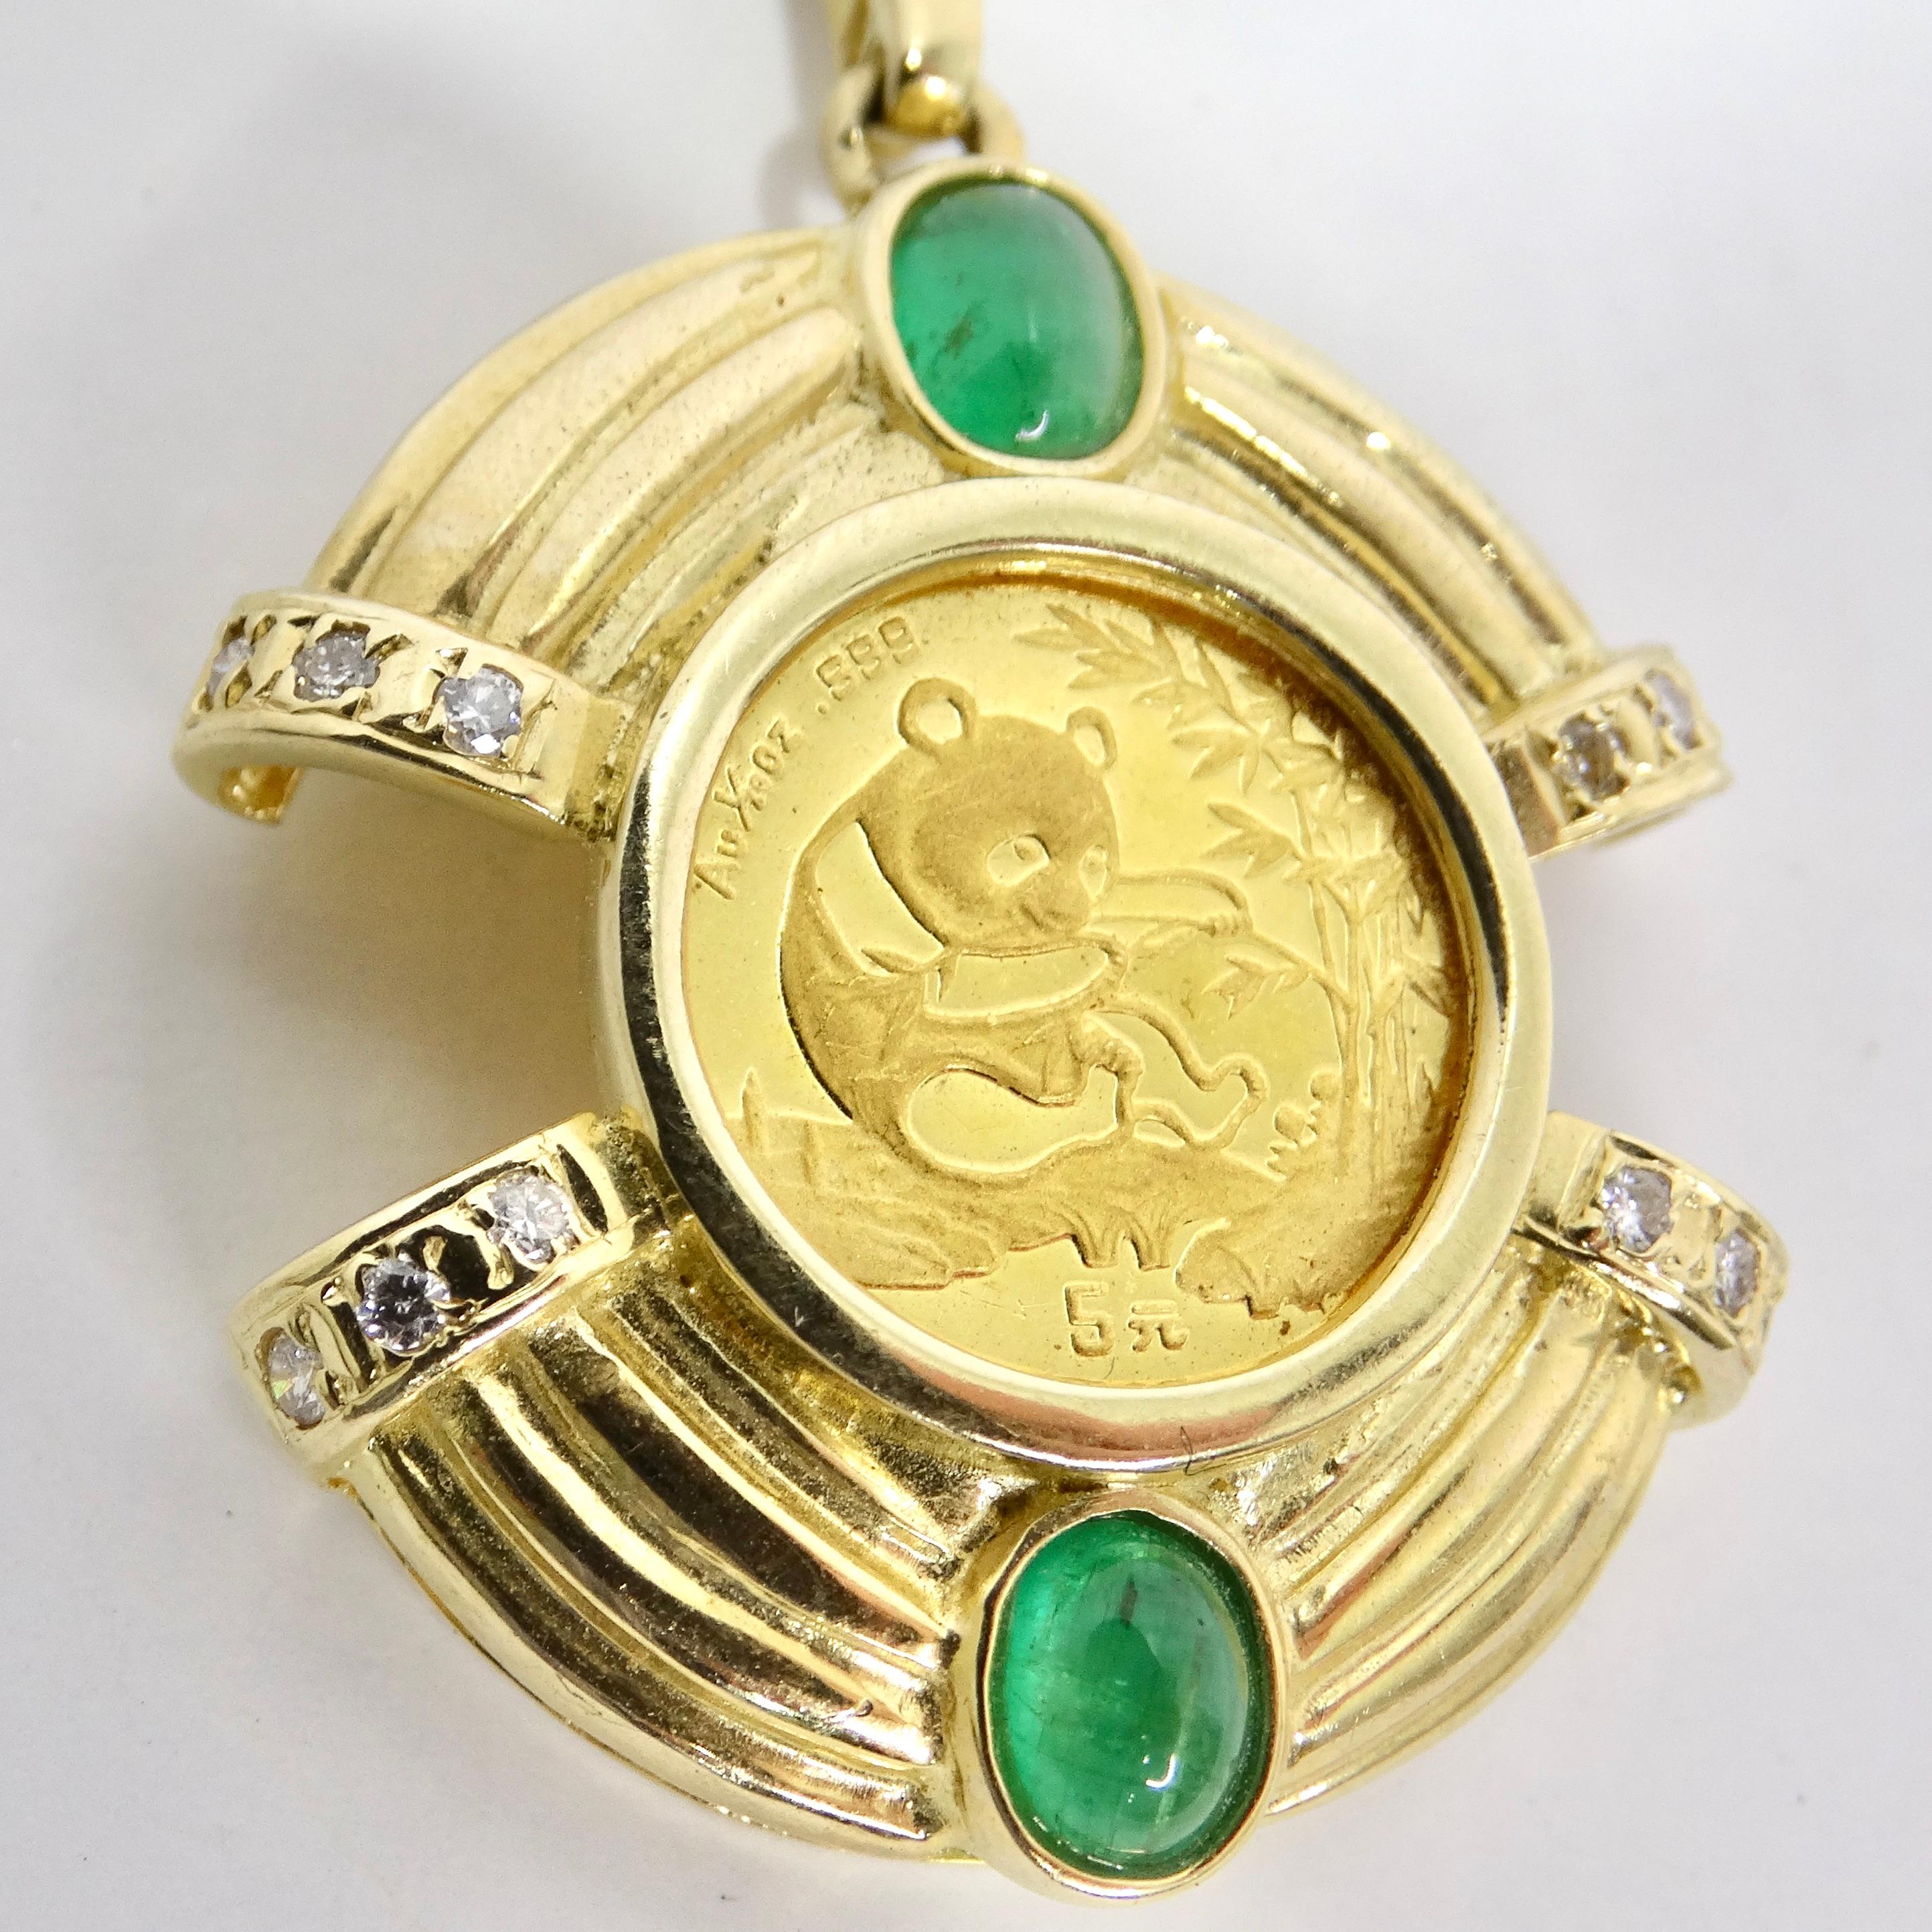 Do not miss out on the Vintage 24K Coin Pendent Cabachon Emerald & Diamonds- A luxurious blend of precious metals and gemstones! The centerpiece of this pendant boasts a 24-karat pure gold coin featuring a charming panda design surrounded by an 18K